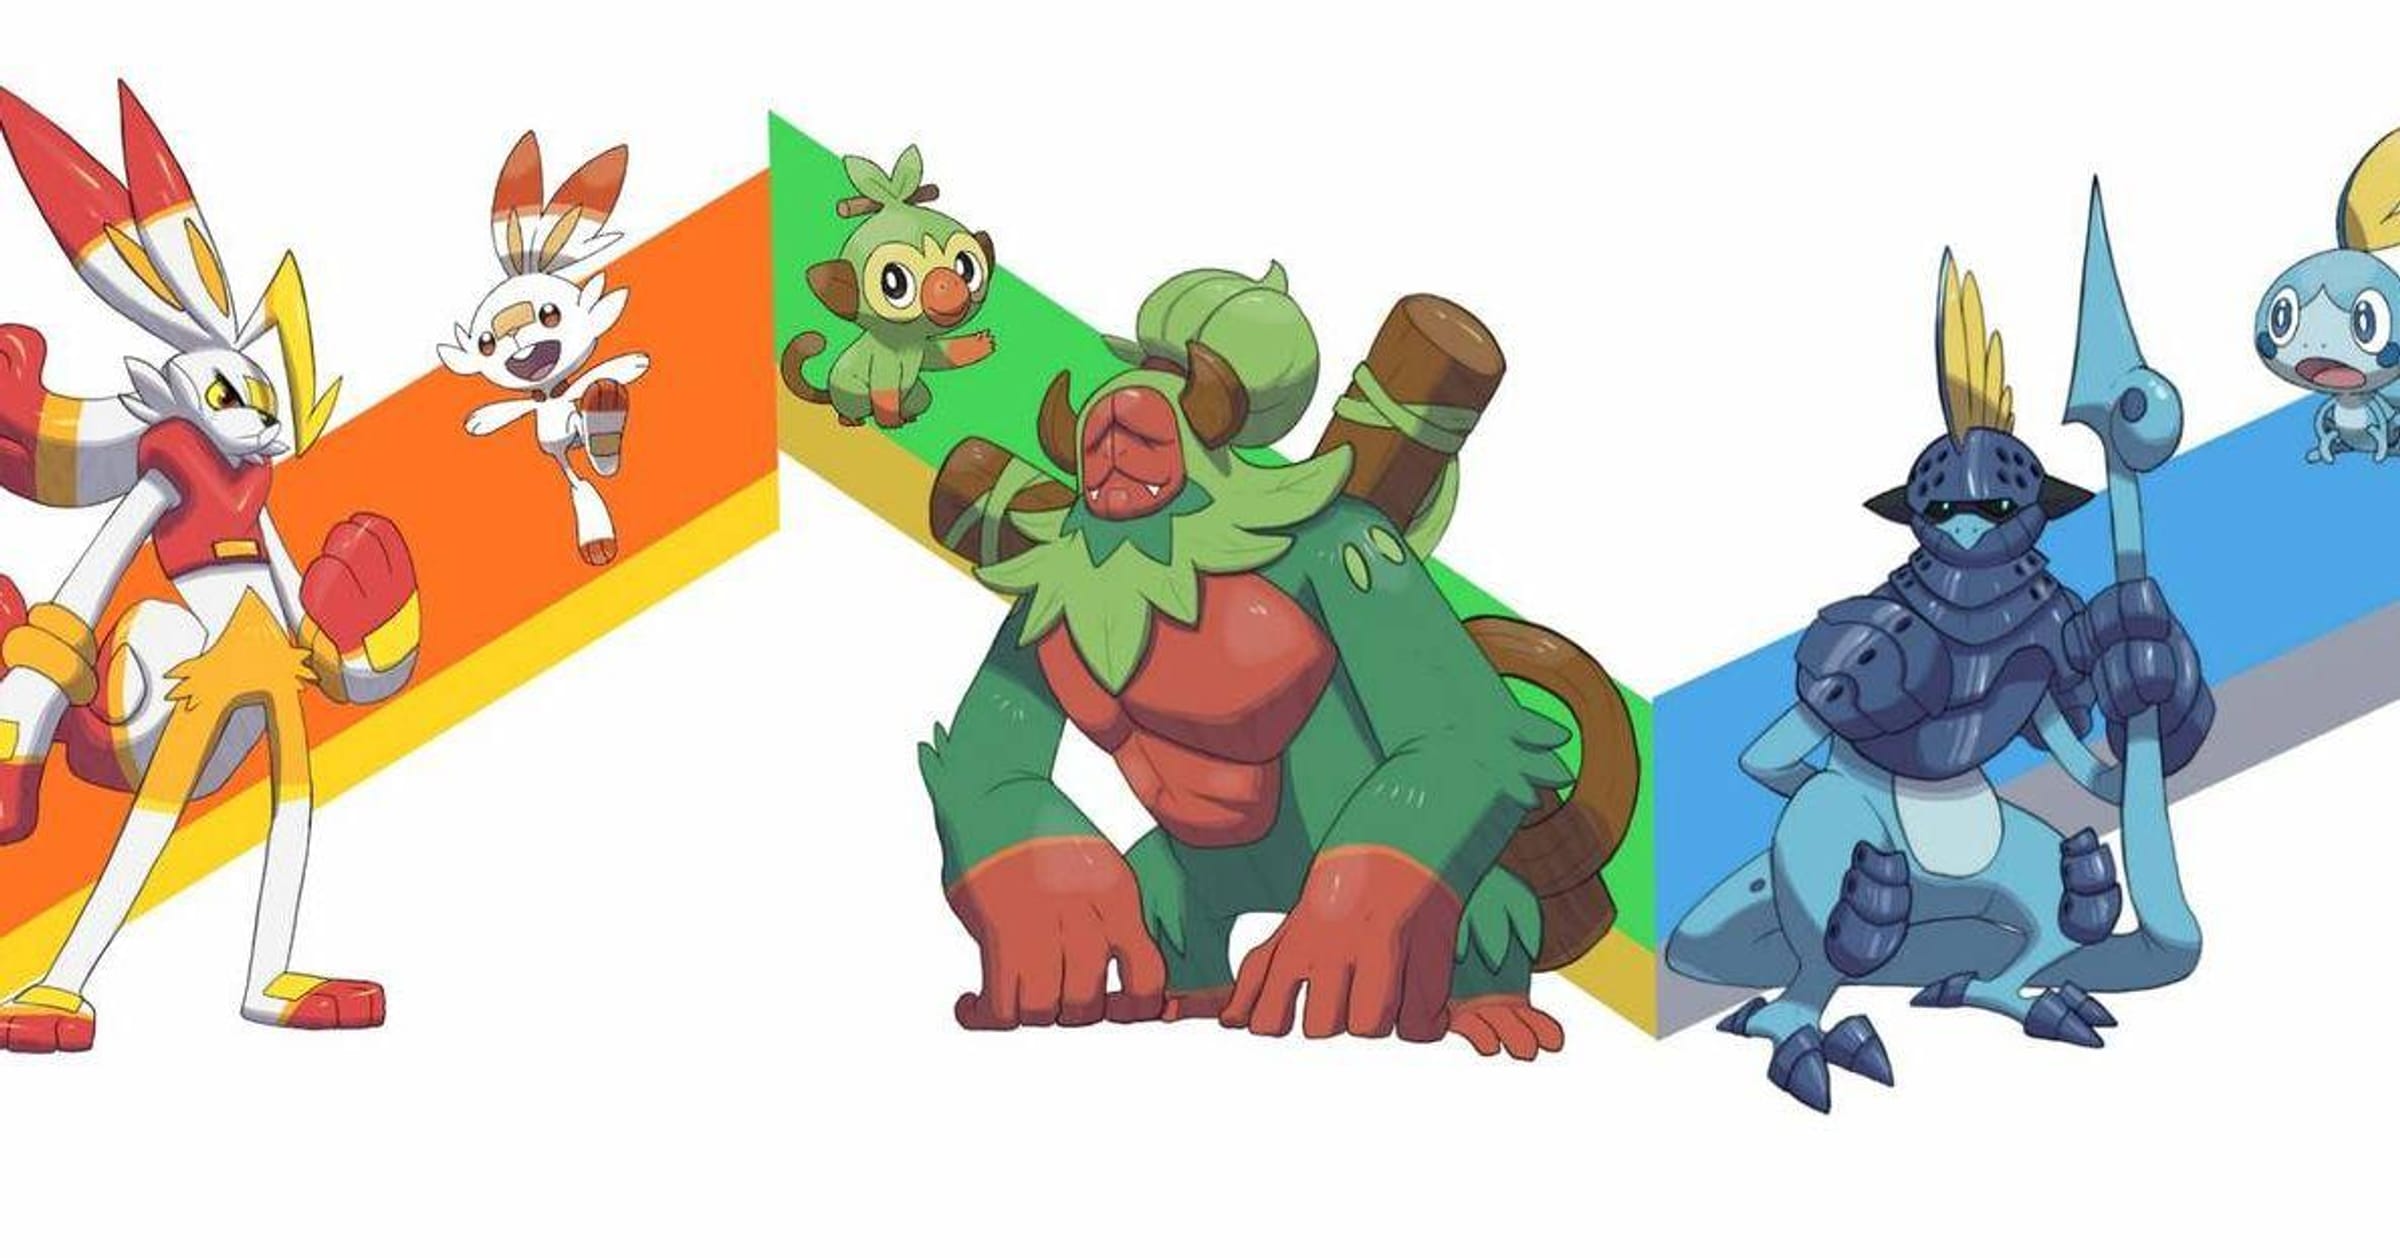 The 'Pokémon Sword' and 'Shield' Starters Already Have Tons of Fan Art